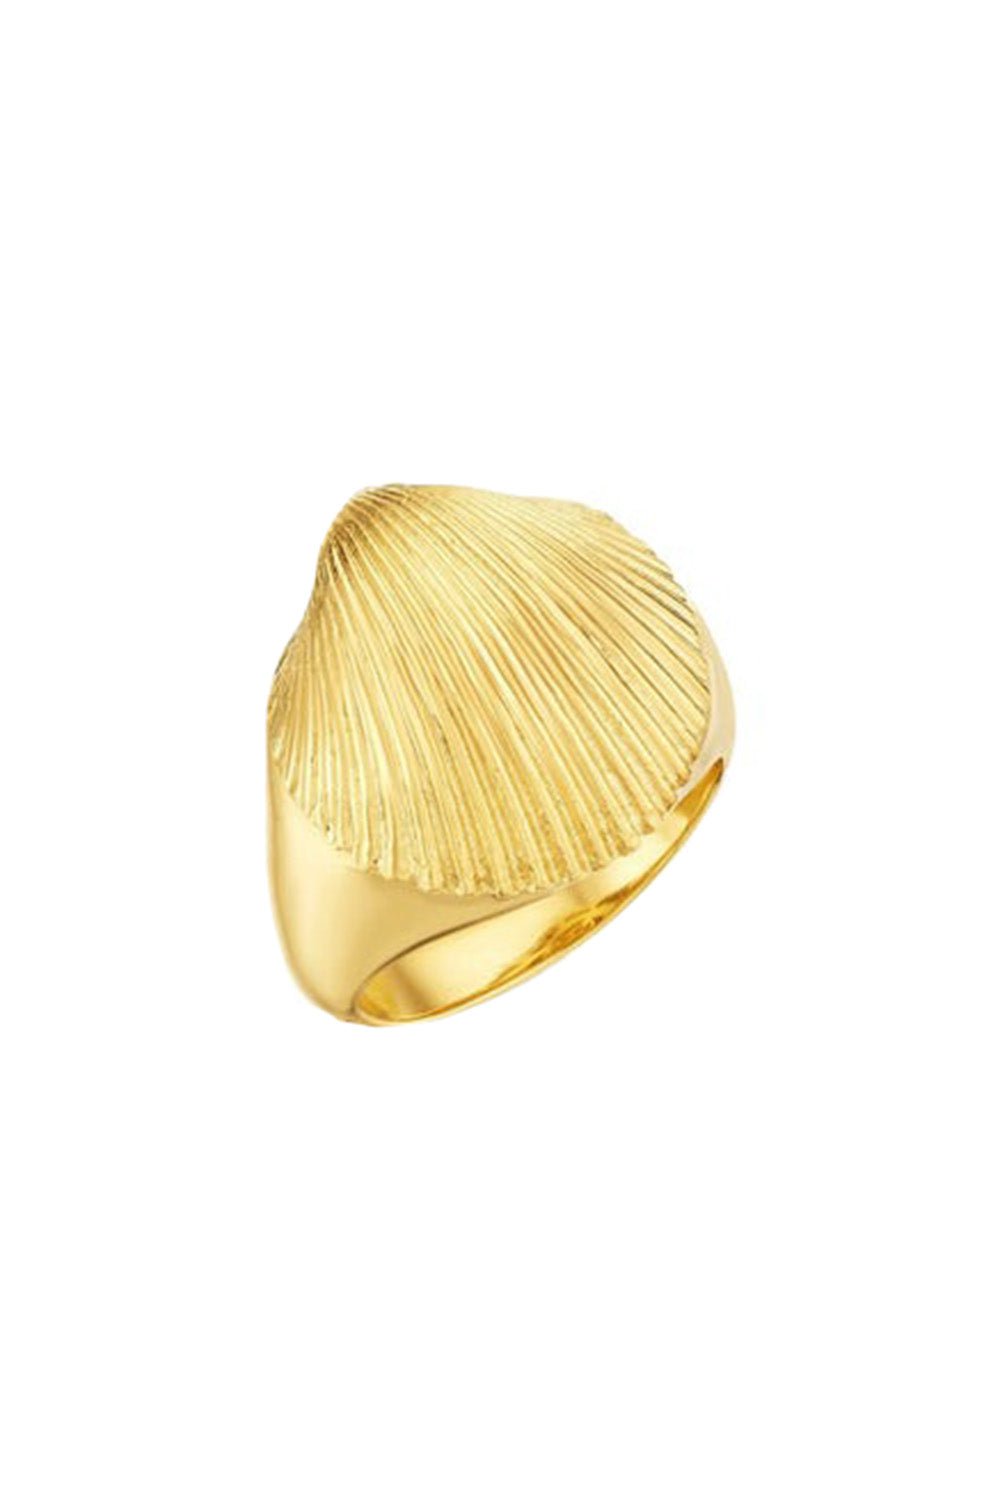 CADAR-Shell Pinky Ring-YELLOW GOLD